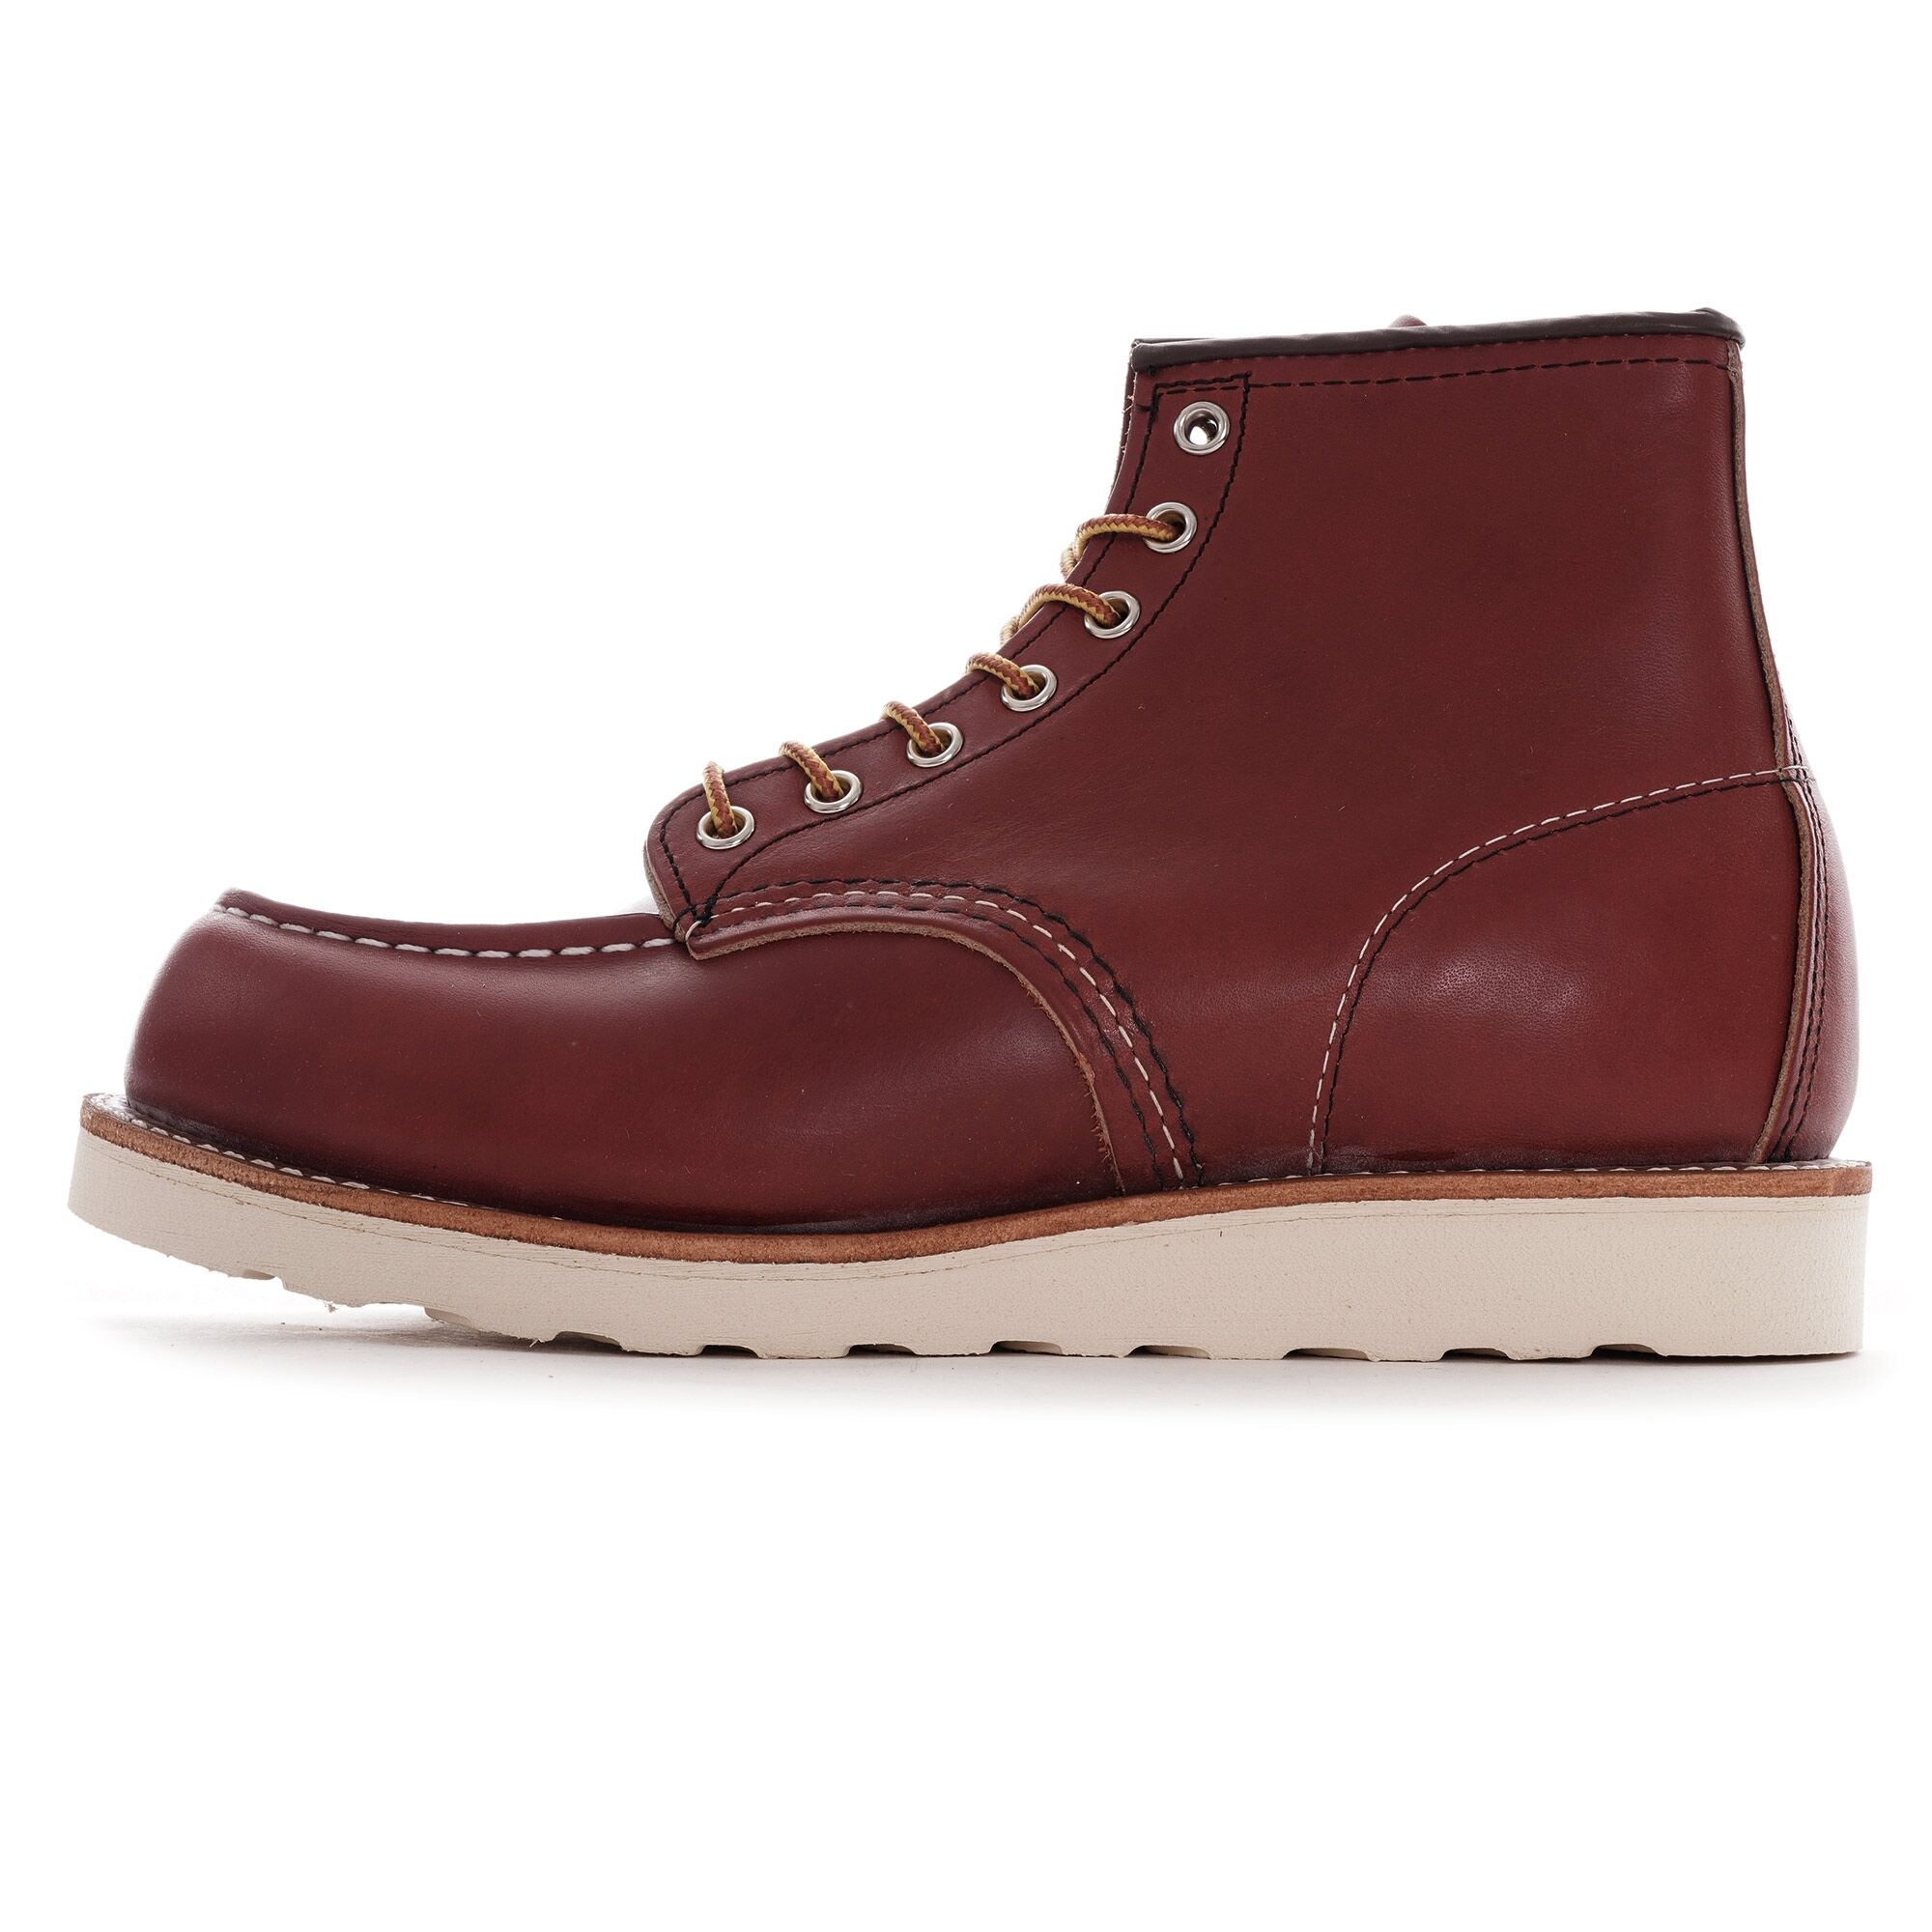 Red Wing Classic Moc Toe Boot - Briar - 8875D-BRN 6 BOOT Colour: Brown - Brown - male - Size: UK 9